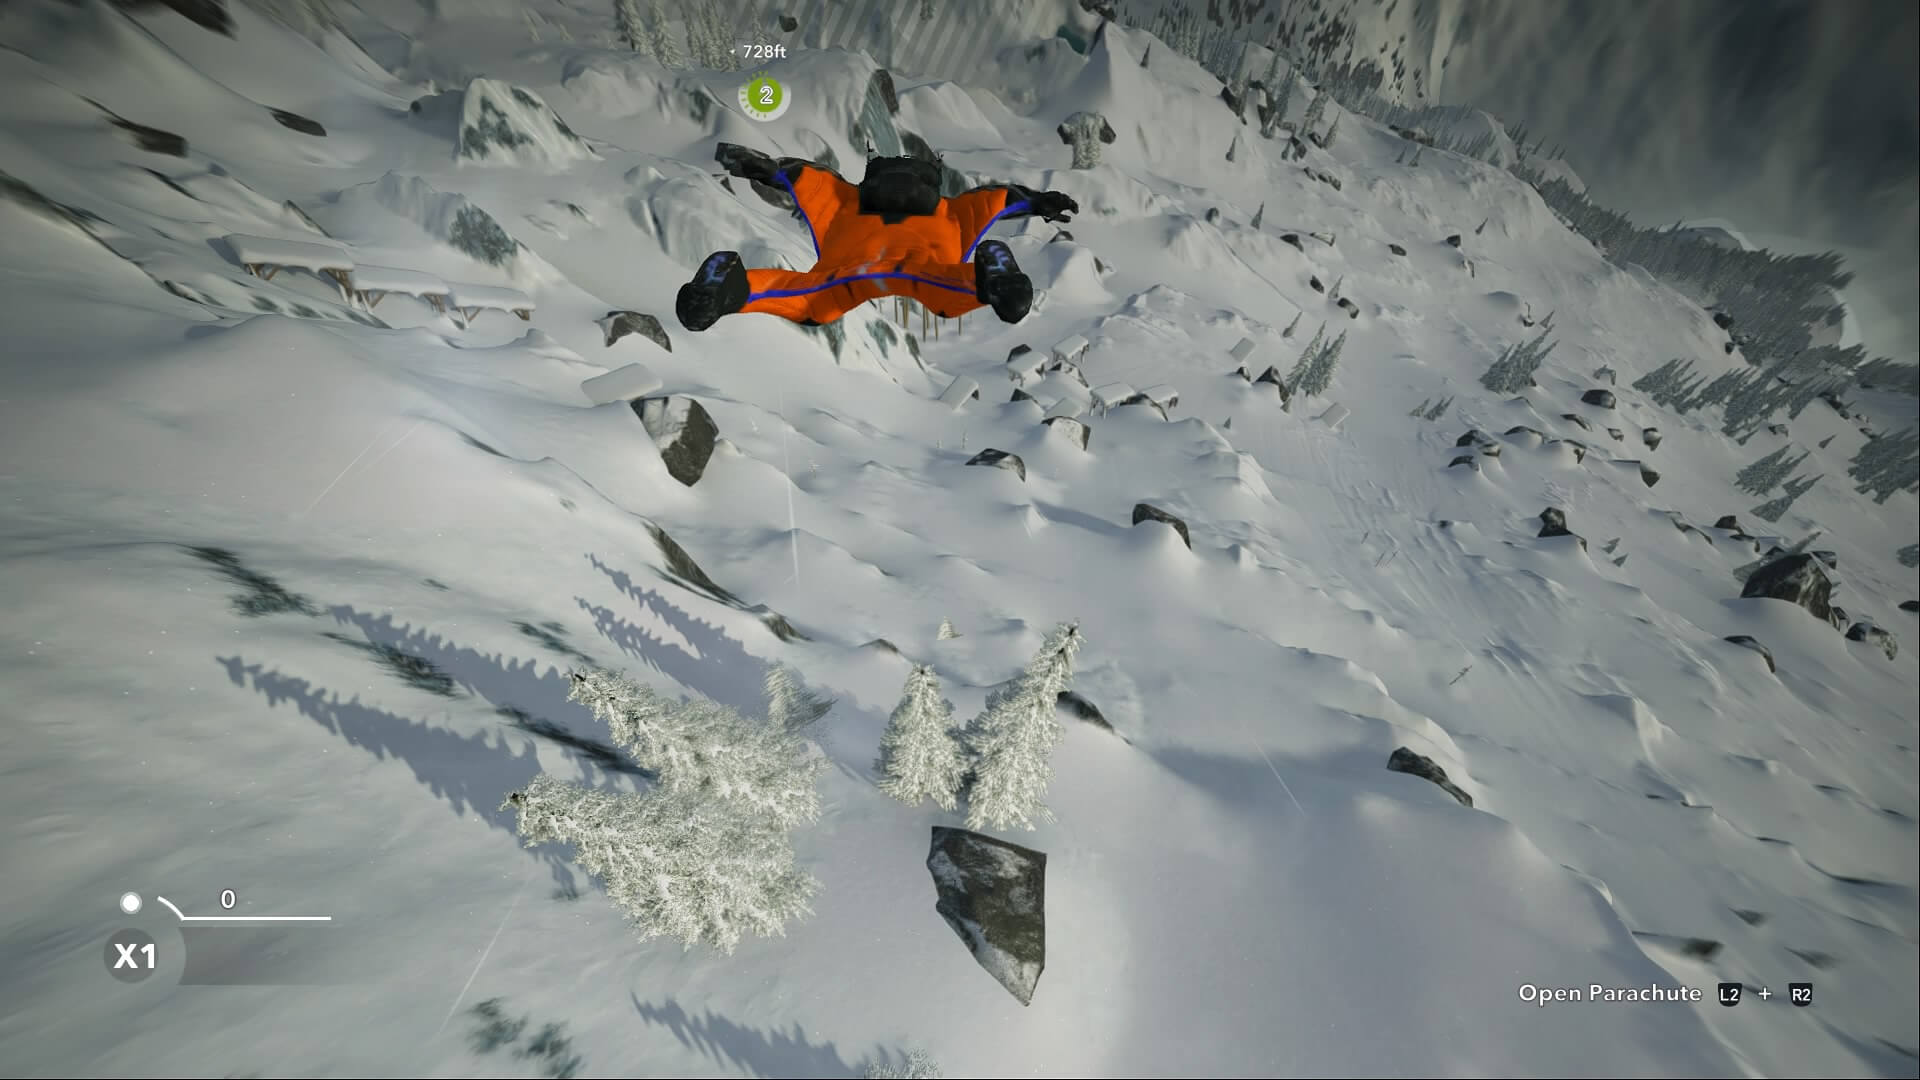 Steep Review - A Tricky, but Exciting Descent